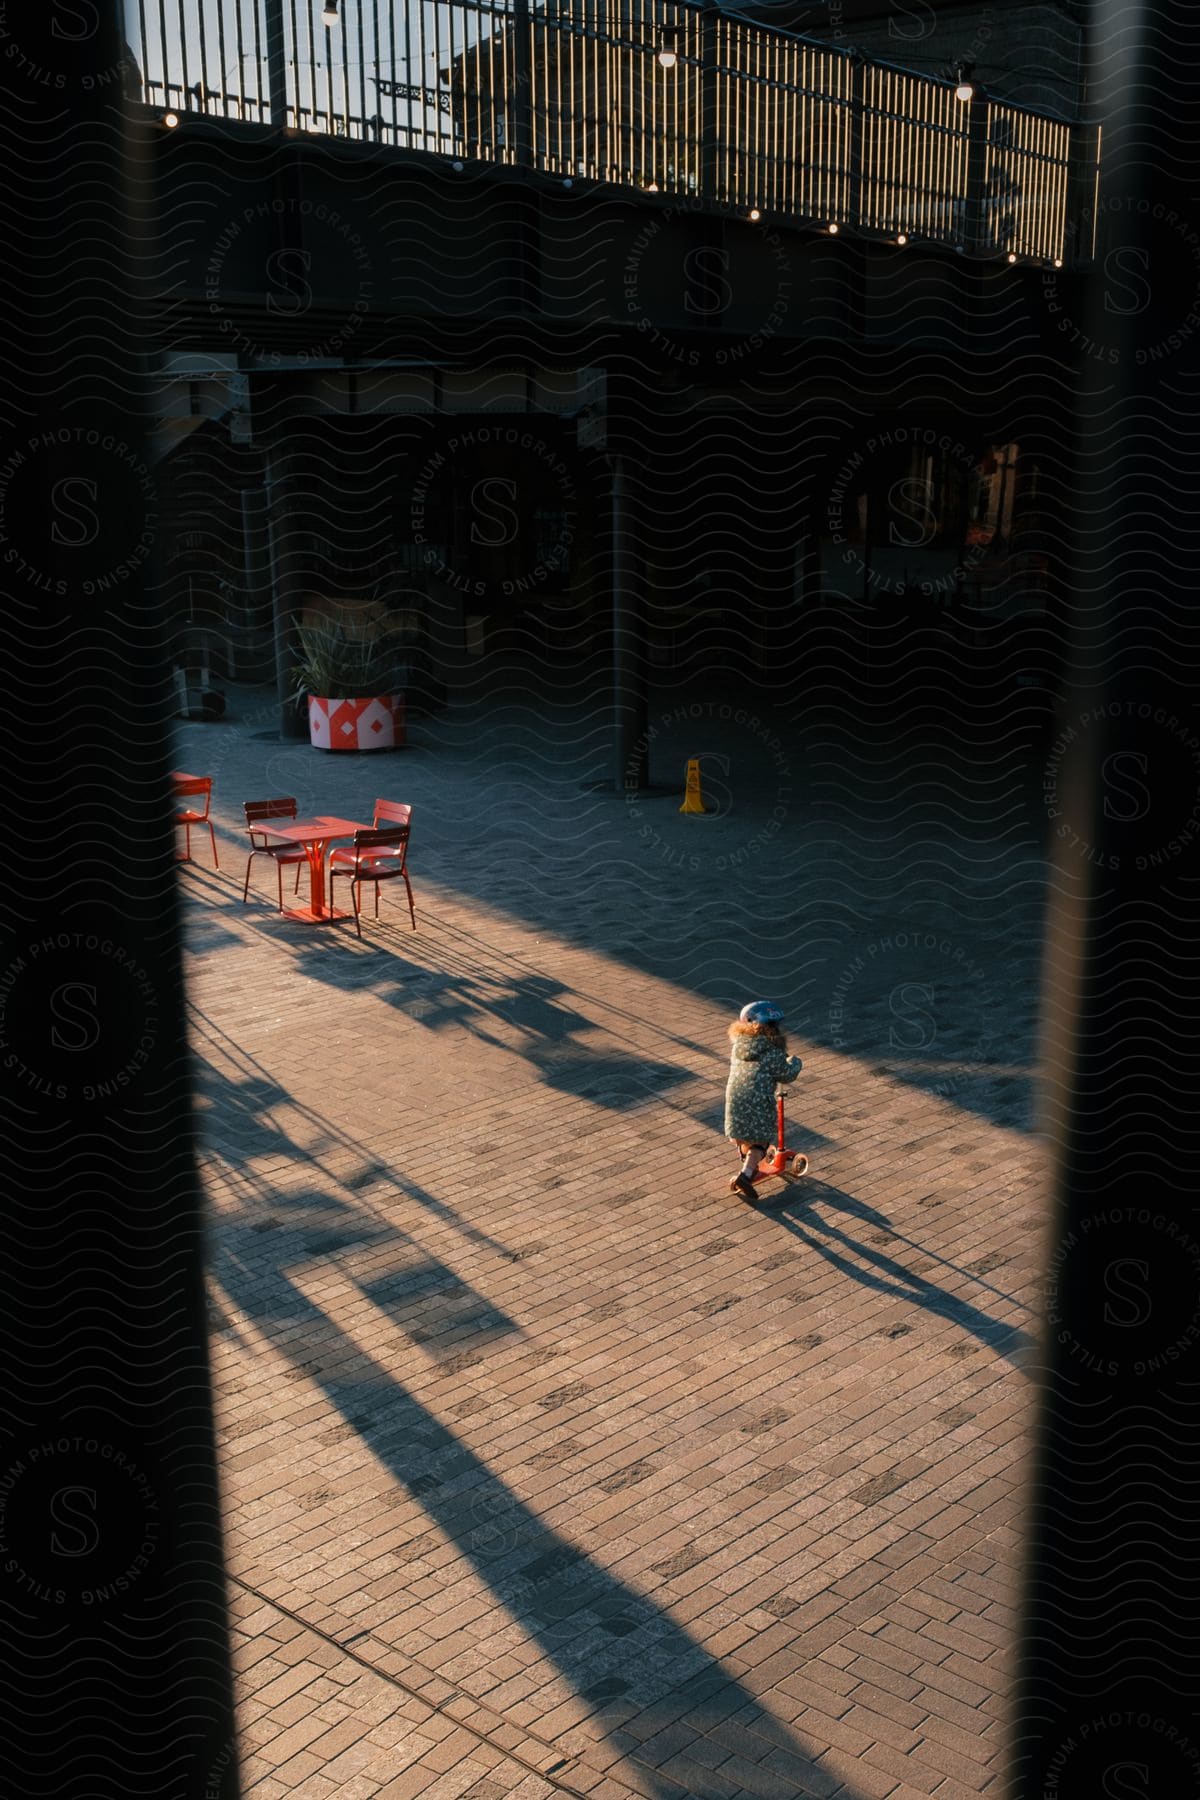 Child riding a scooter in a courtyard with red tables.